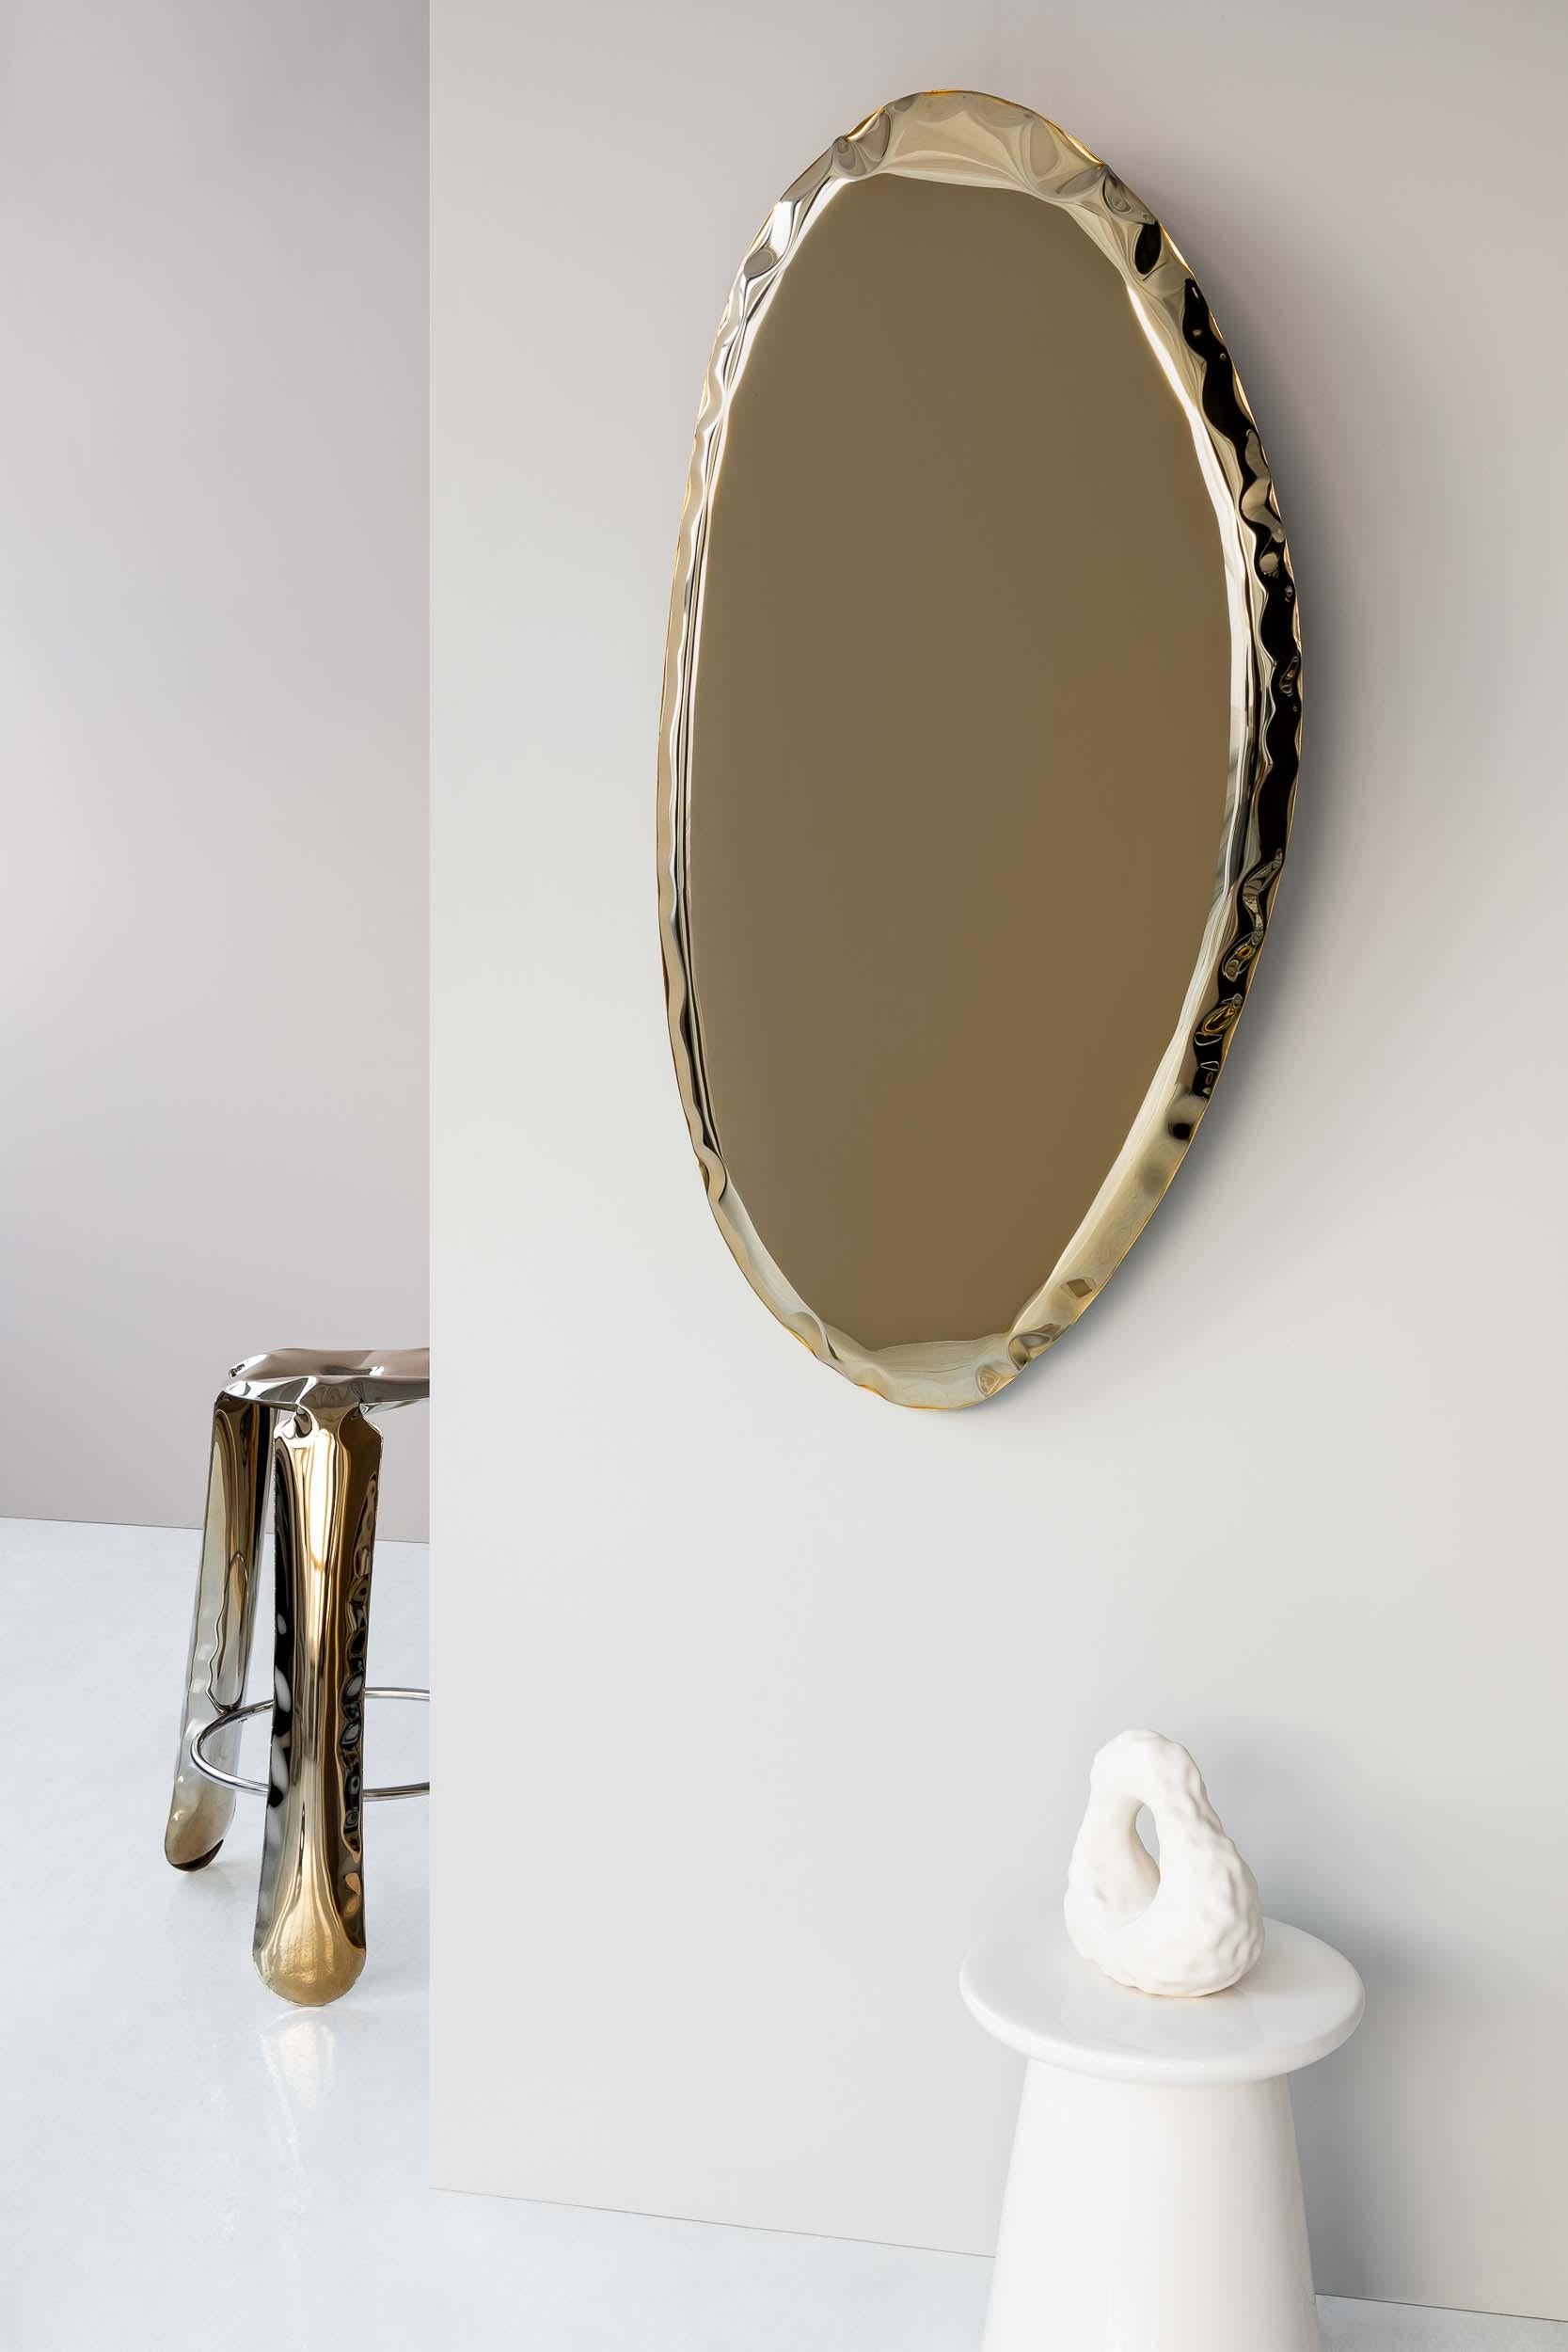 Polished Contemporary Mirror 'Tafla O6', AURUM Collection, Classic Gold, by Zieta For Sale